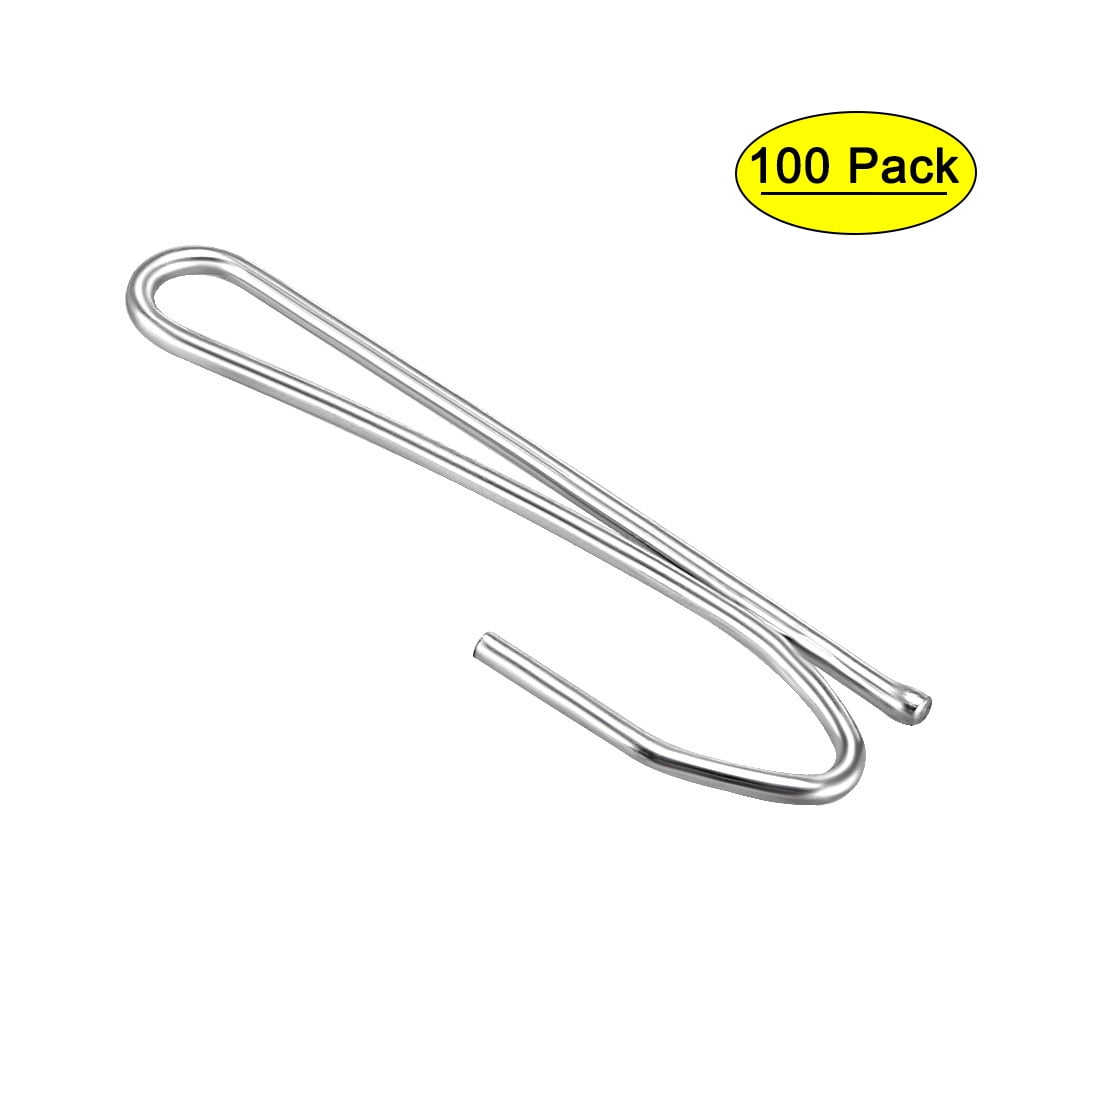 Curtain Metal Pin Pinch Pleat Golden Quality Hooks Available in 25 85 100 Pack 